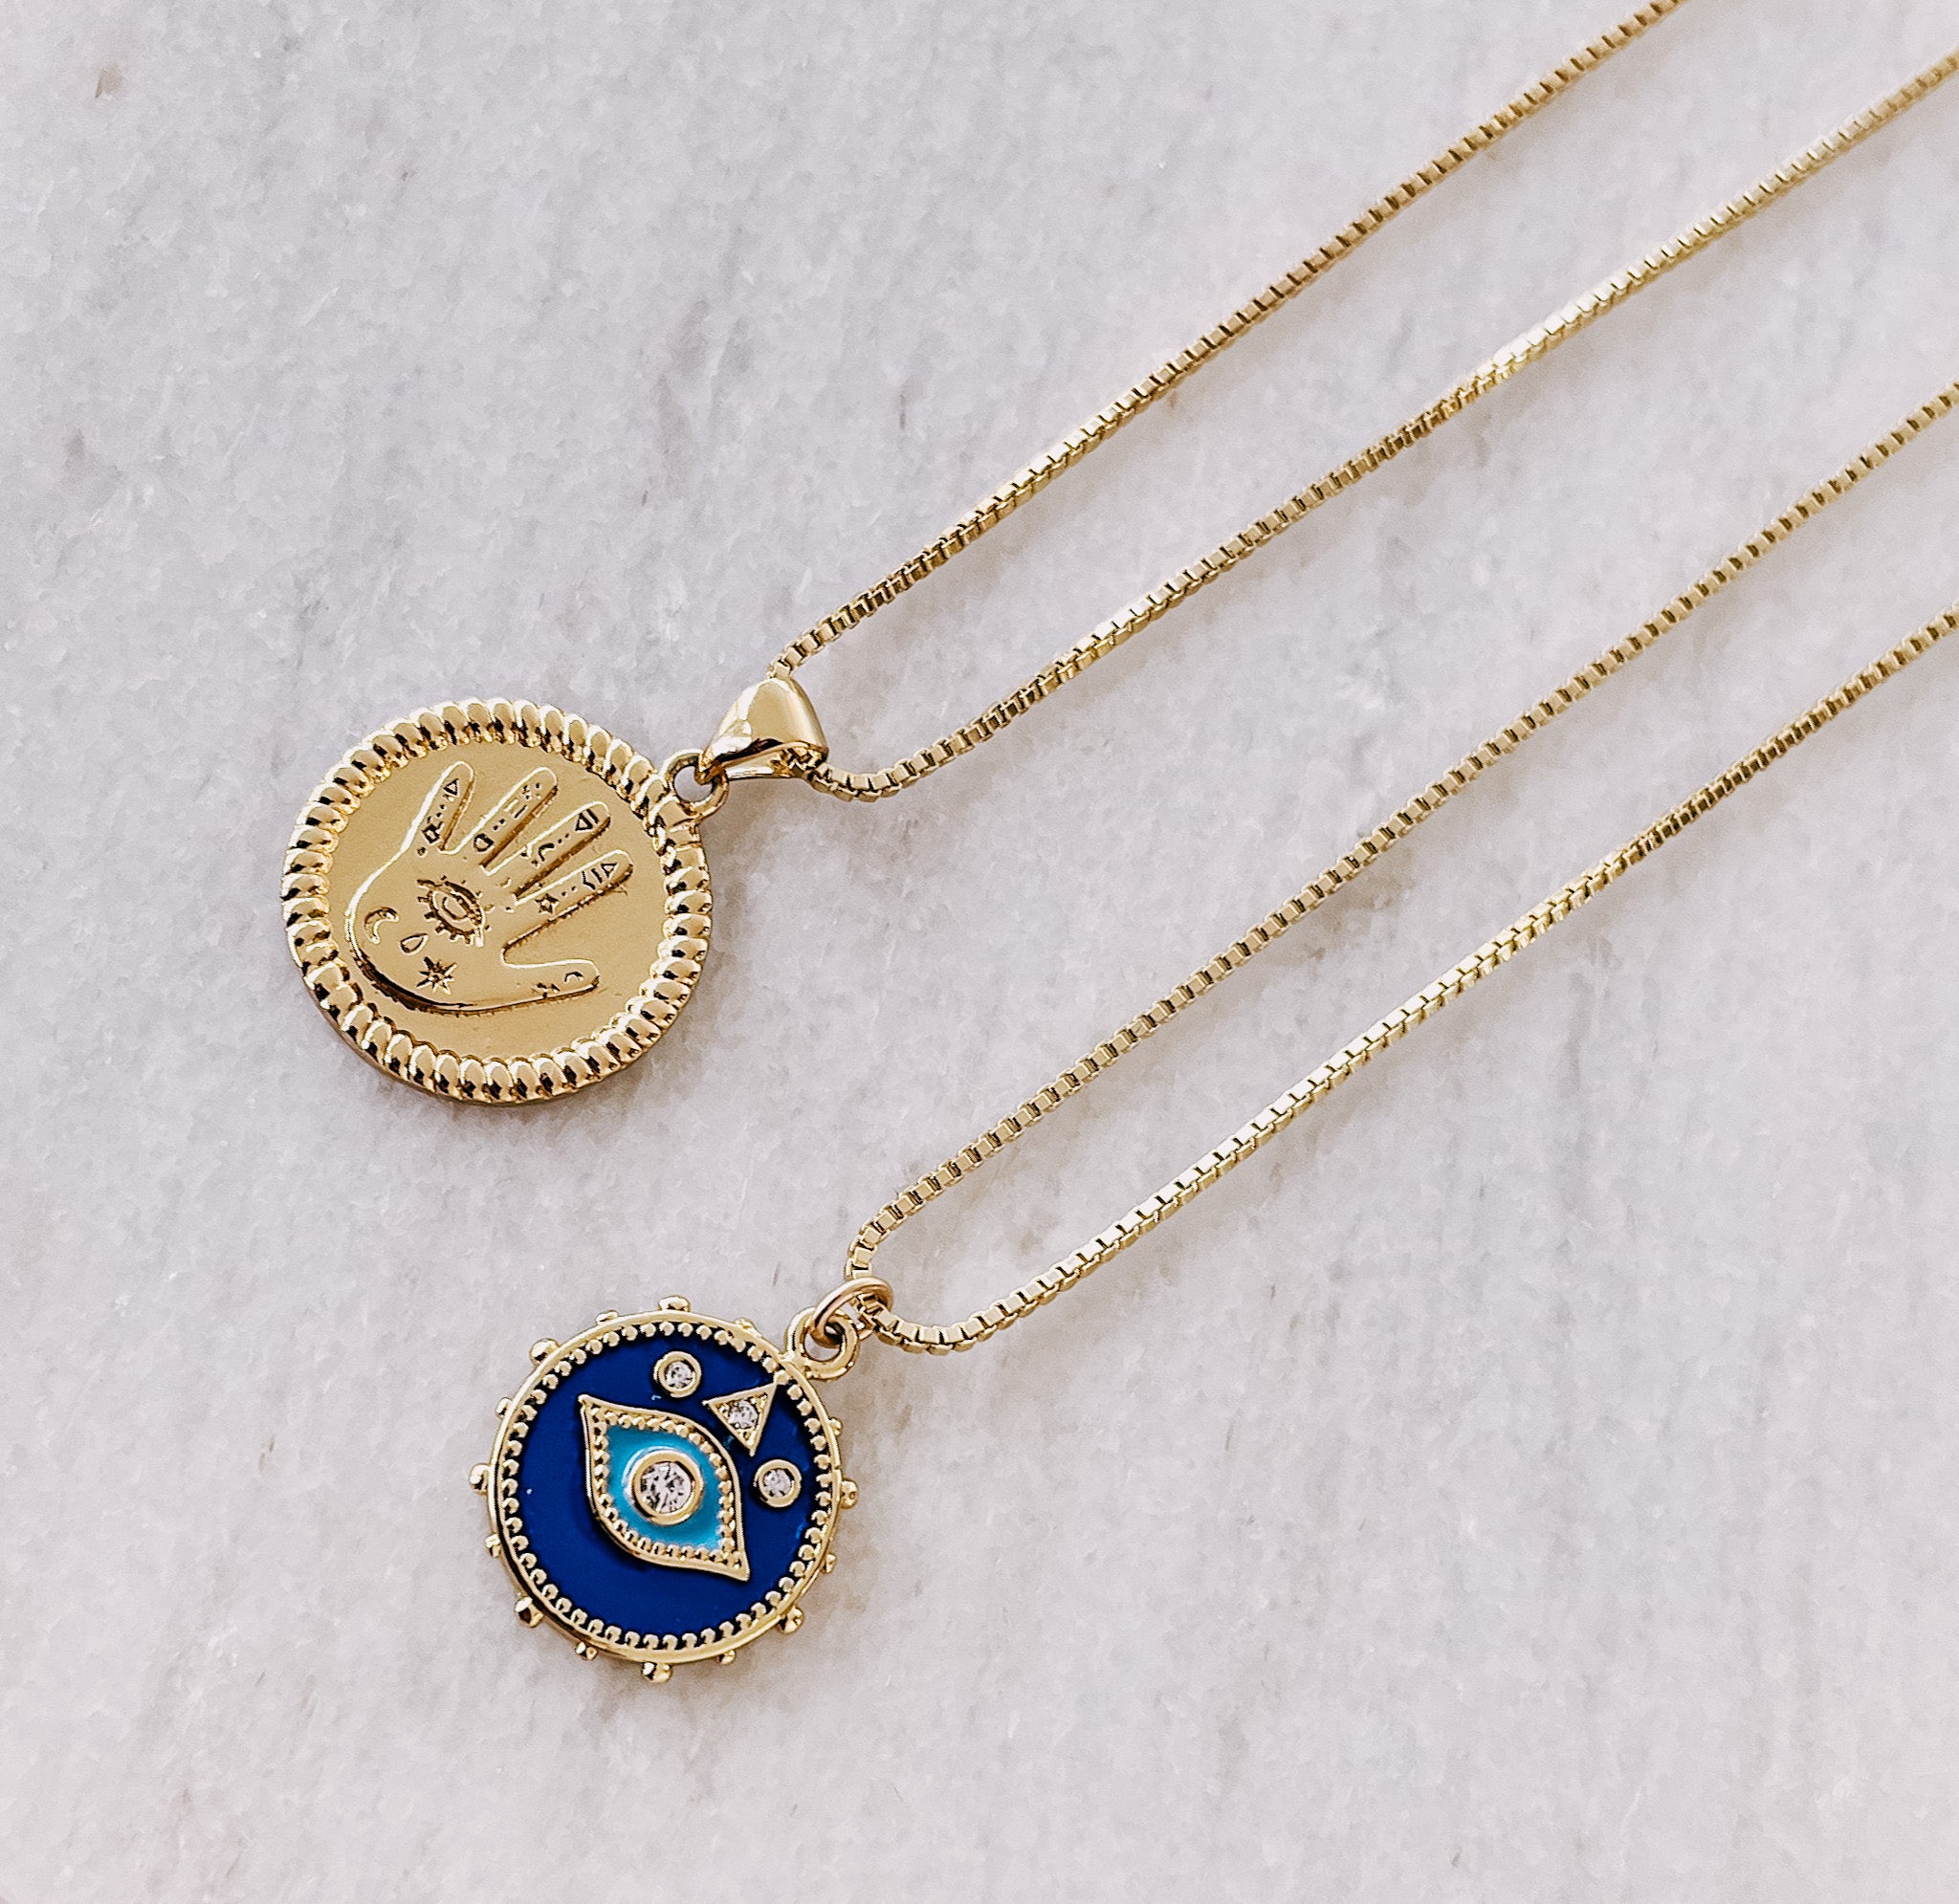 AW Boutique's gold filled jewellery. 18 inch box chain with vintage evil eye enamel coin shaped pendant necklace.  This image shows the Vintage Evil Eye Enamel Necklace in a flat lay image with the Vintage Hamsa Coin Necklace.